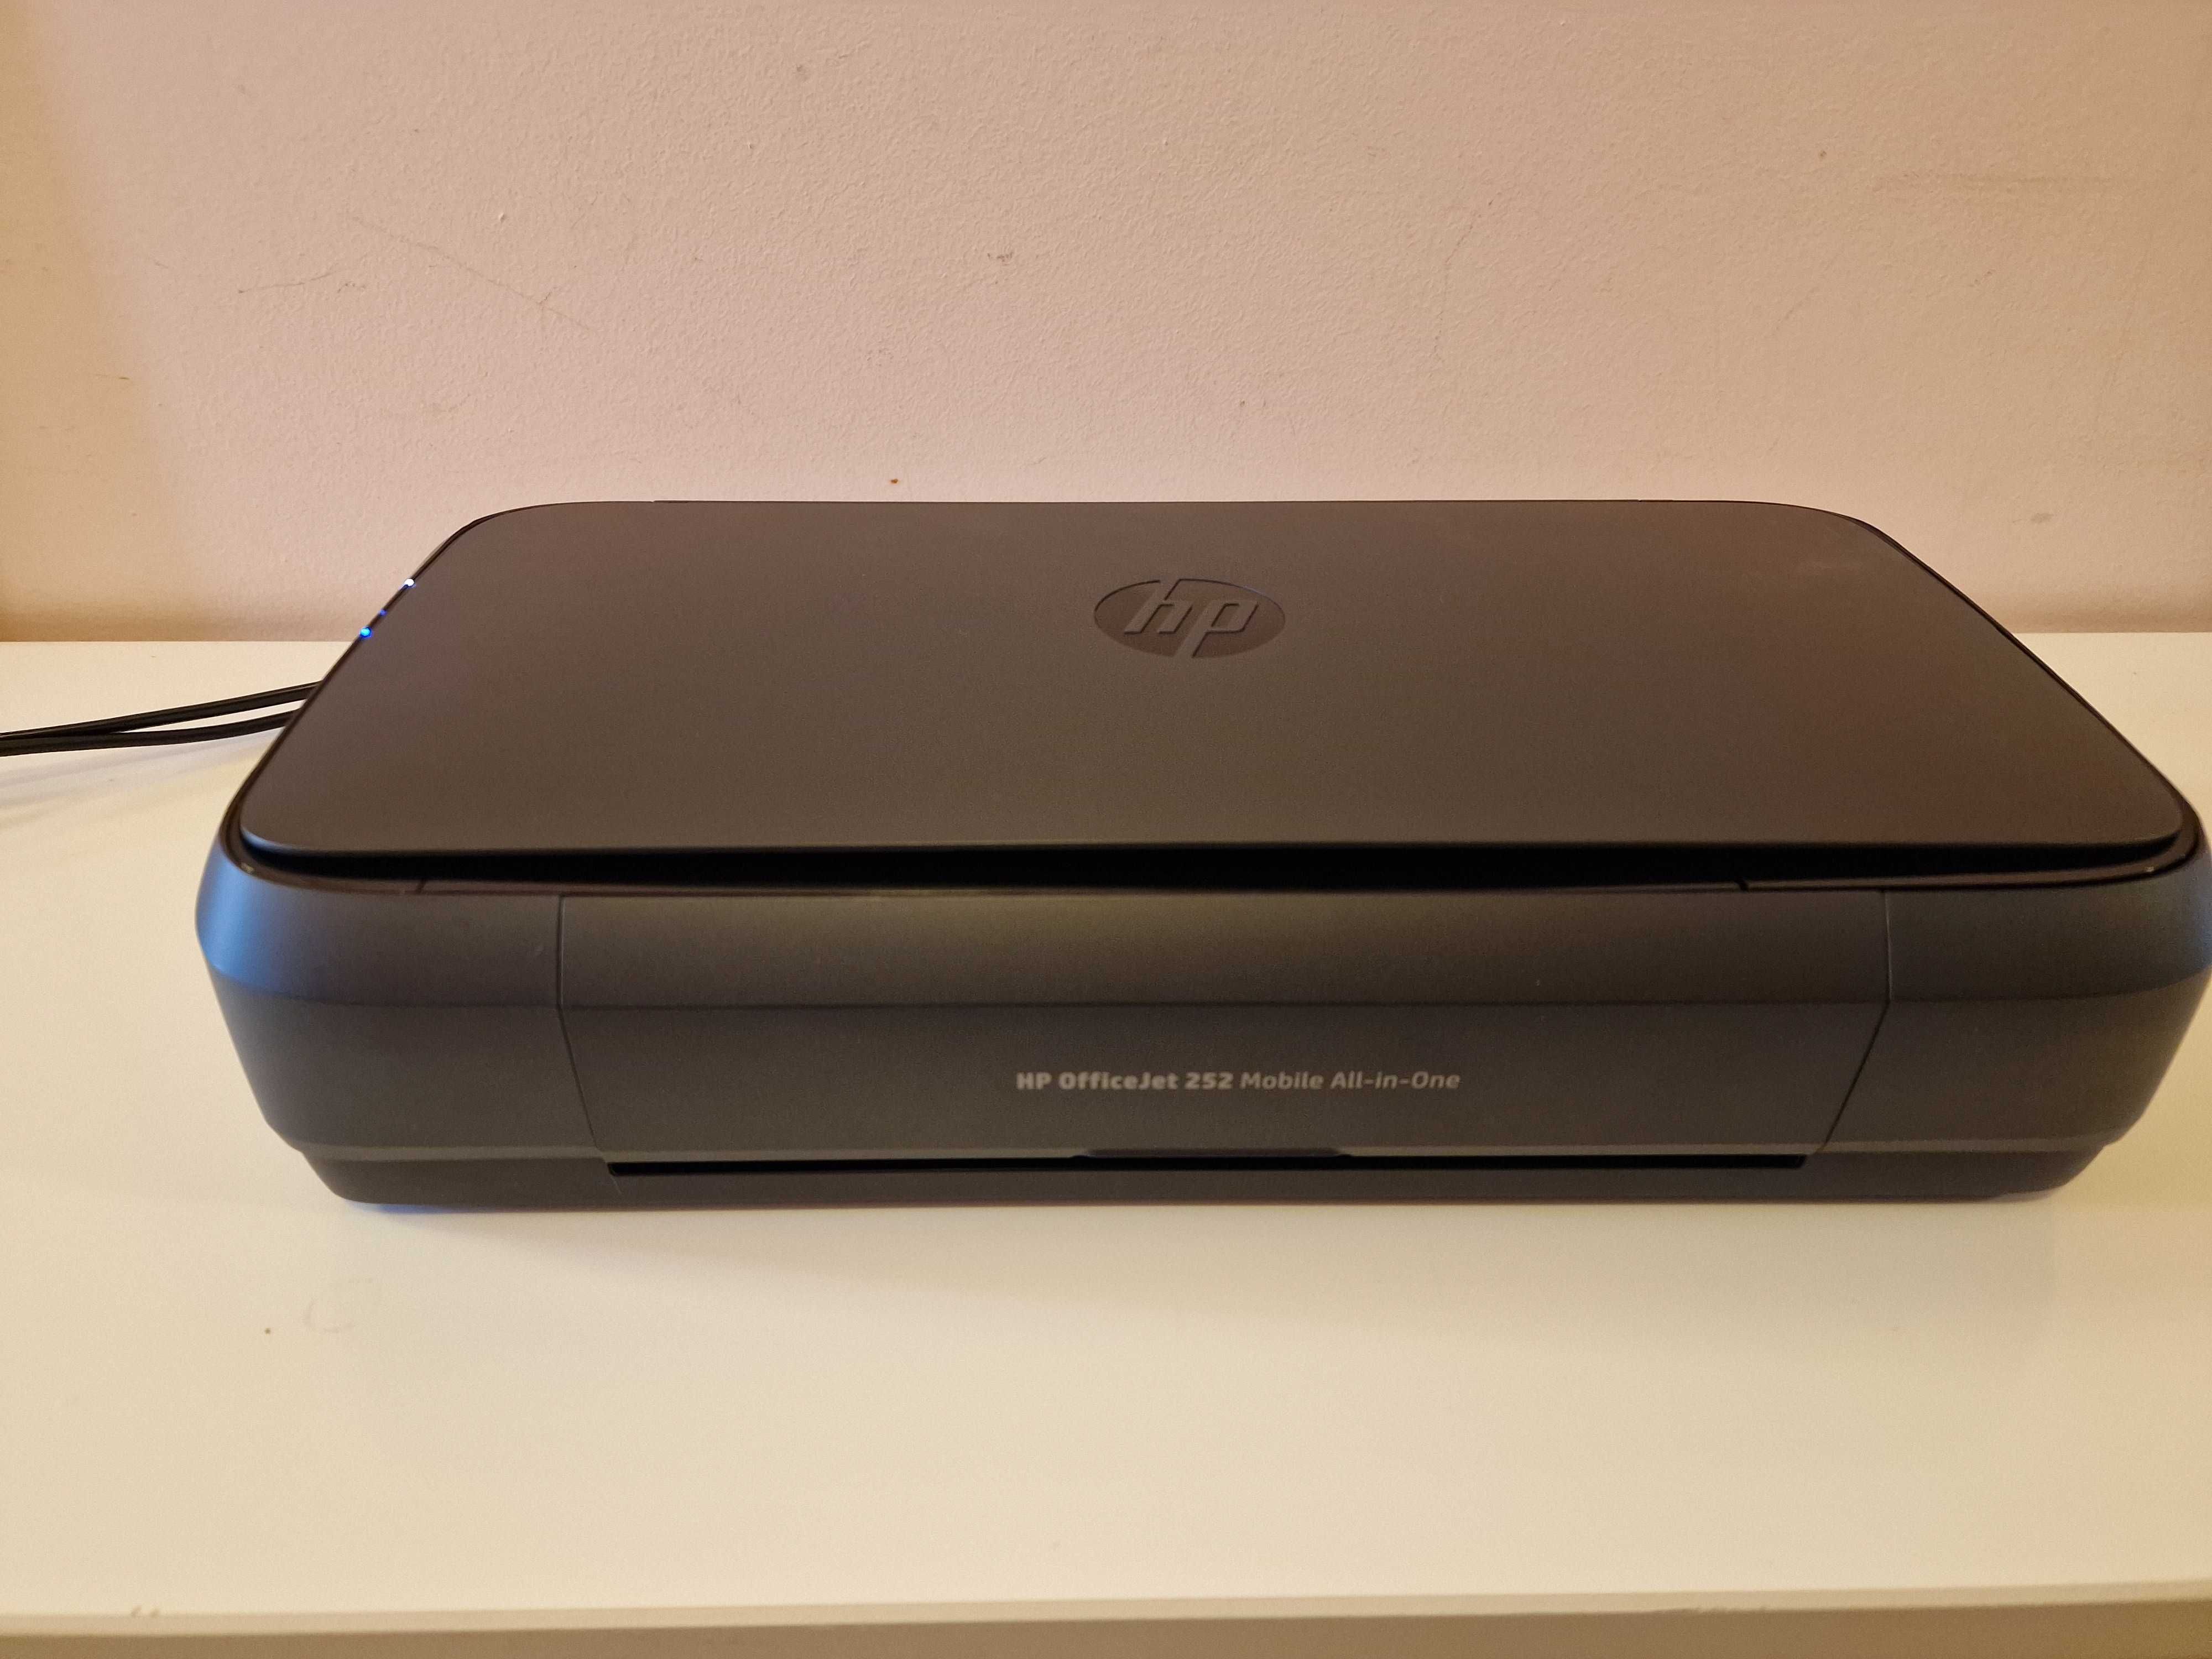 Imprimanta HP OfficeJet 252 Mobile All-in-One